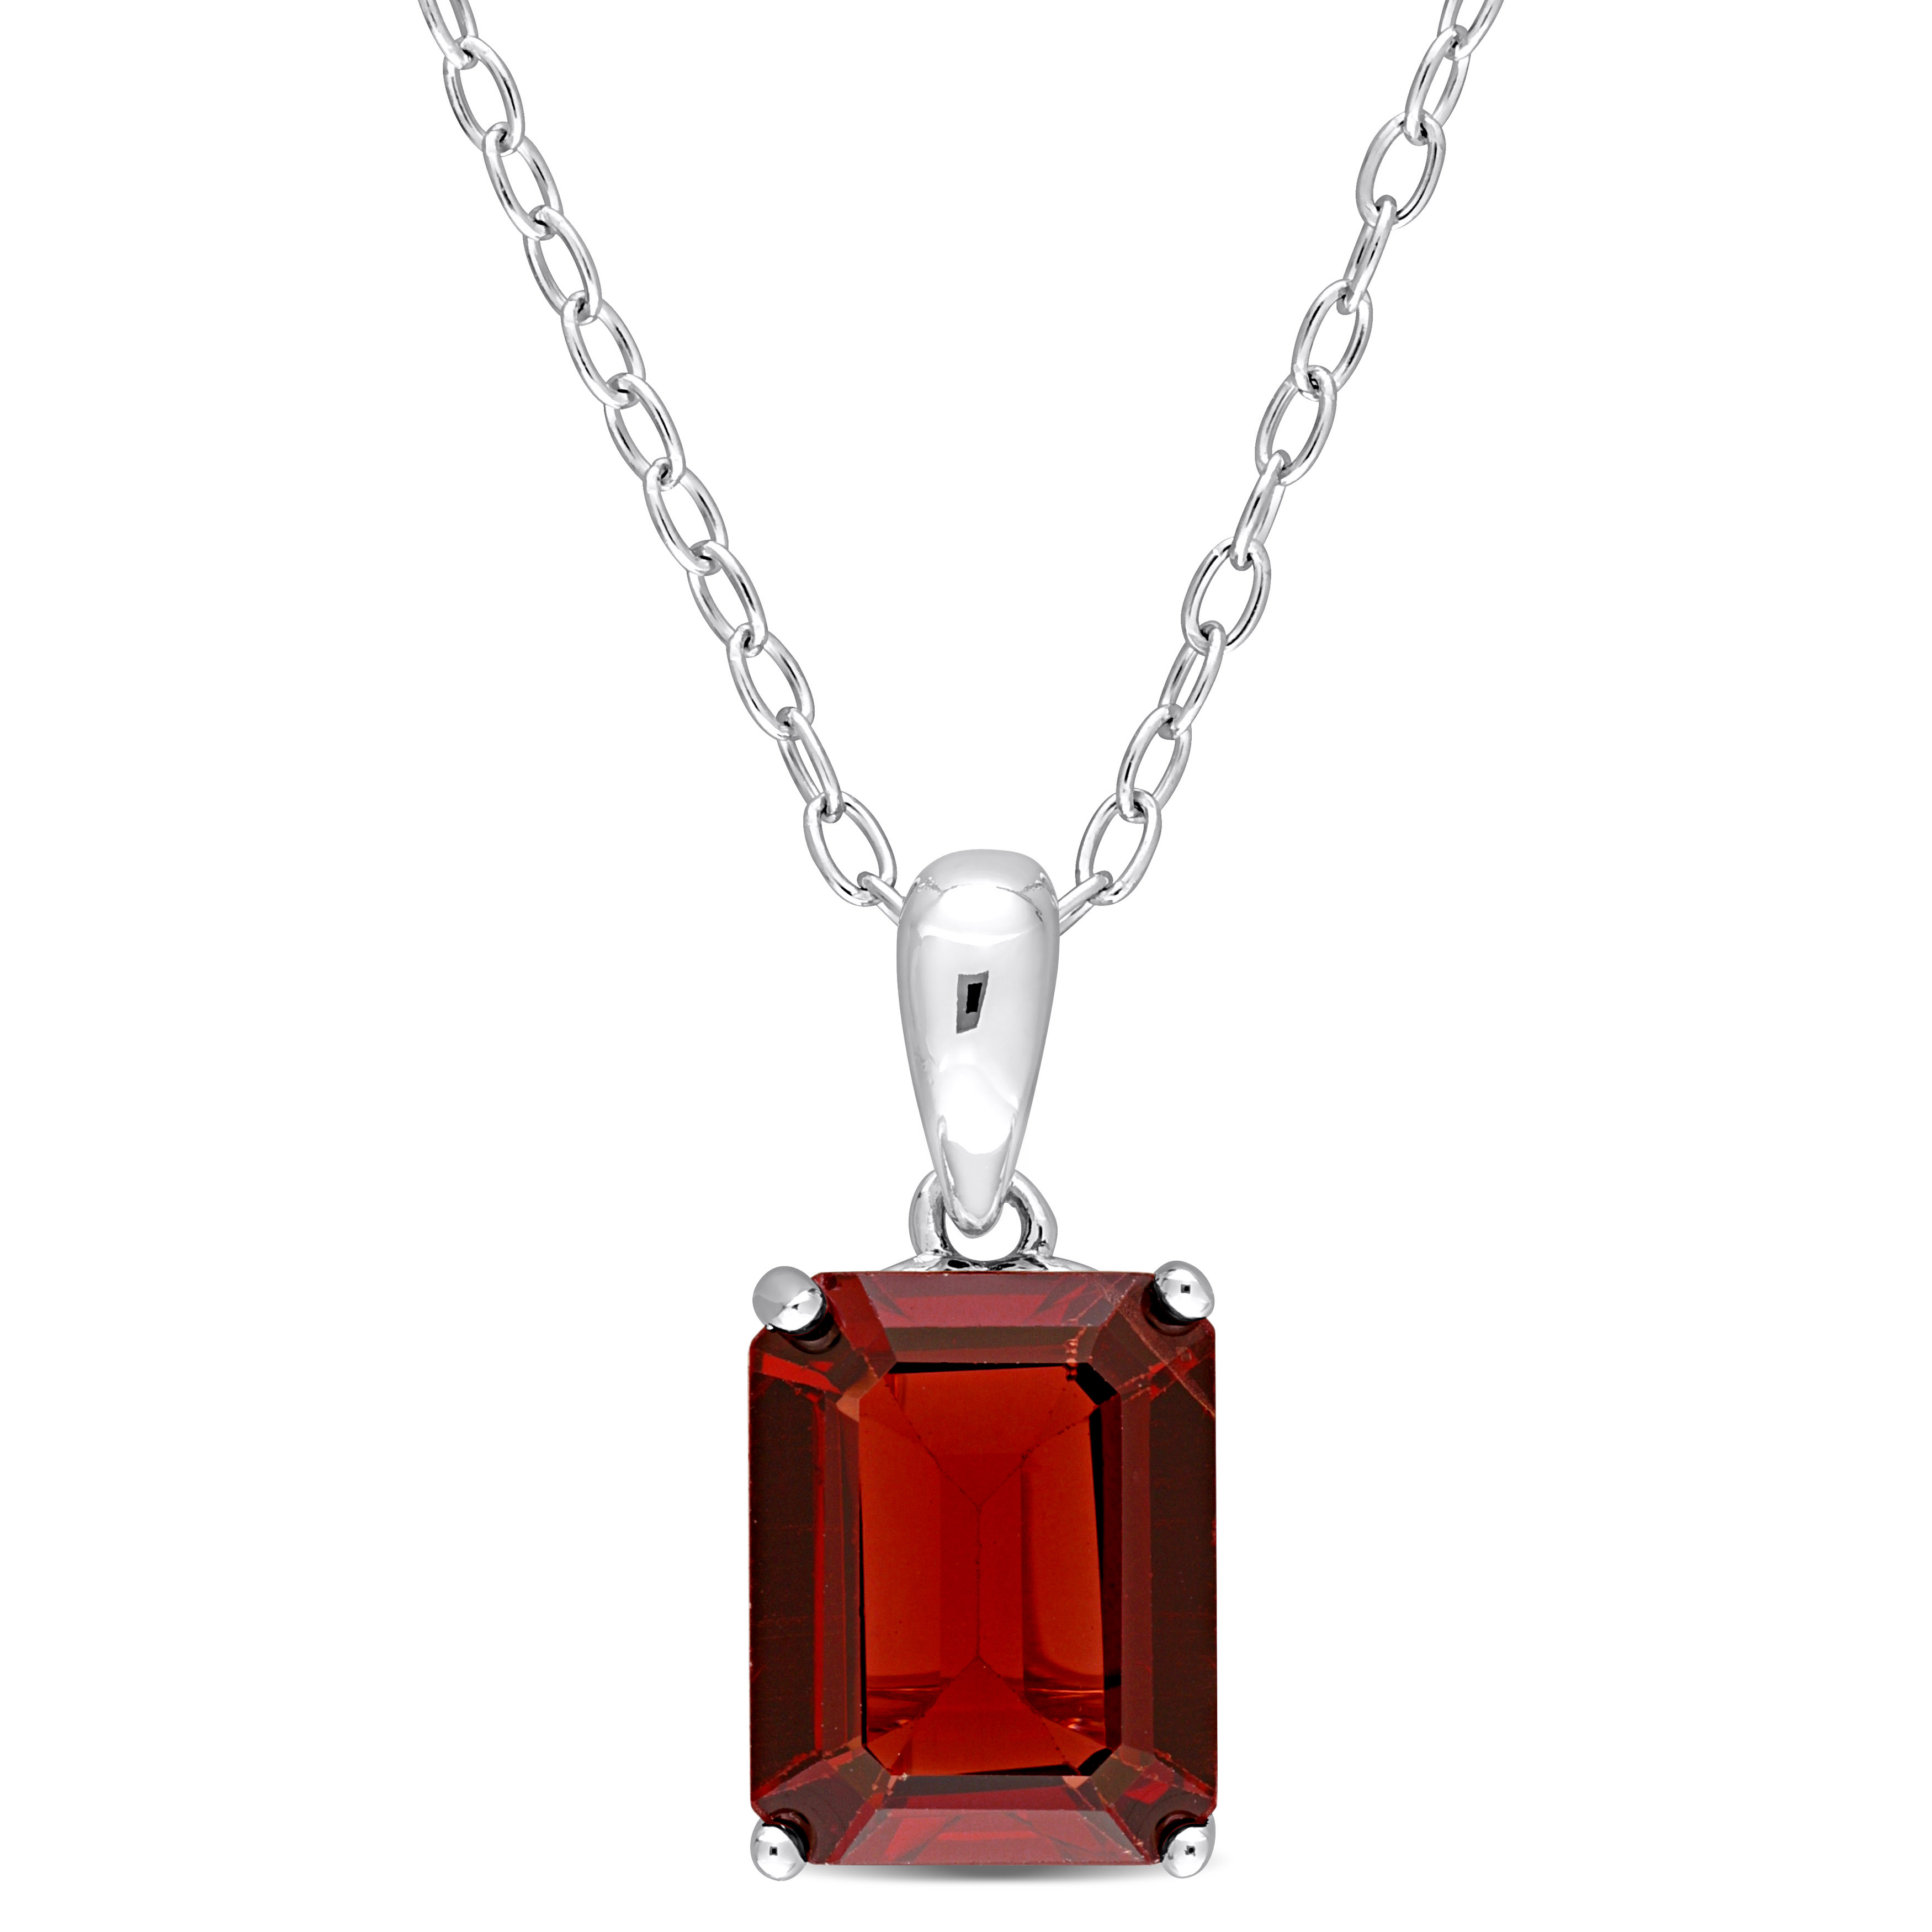 2 1/2 CT TGW Emerald Cut Garnet Solitaire Heart Design Pendant with Chain in Sterling Silver - 18 in.